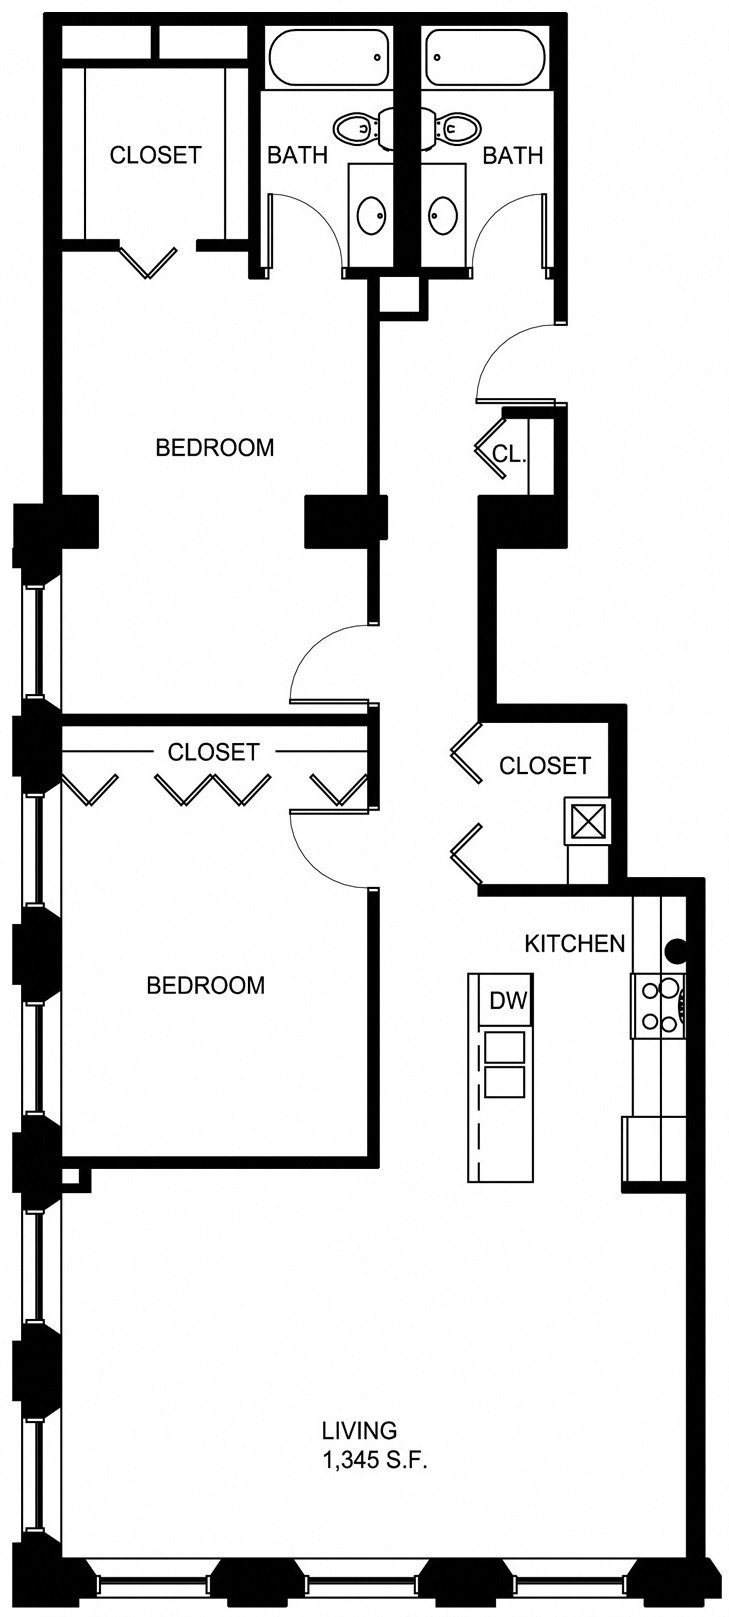 Floorplan for Apartment #P445, 2 bedroom unit at Halstead Providence